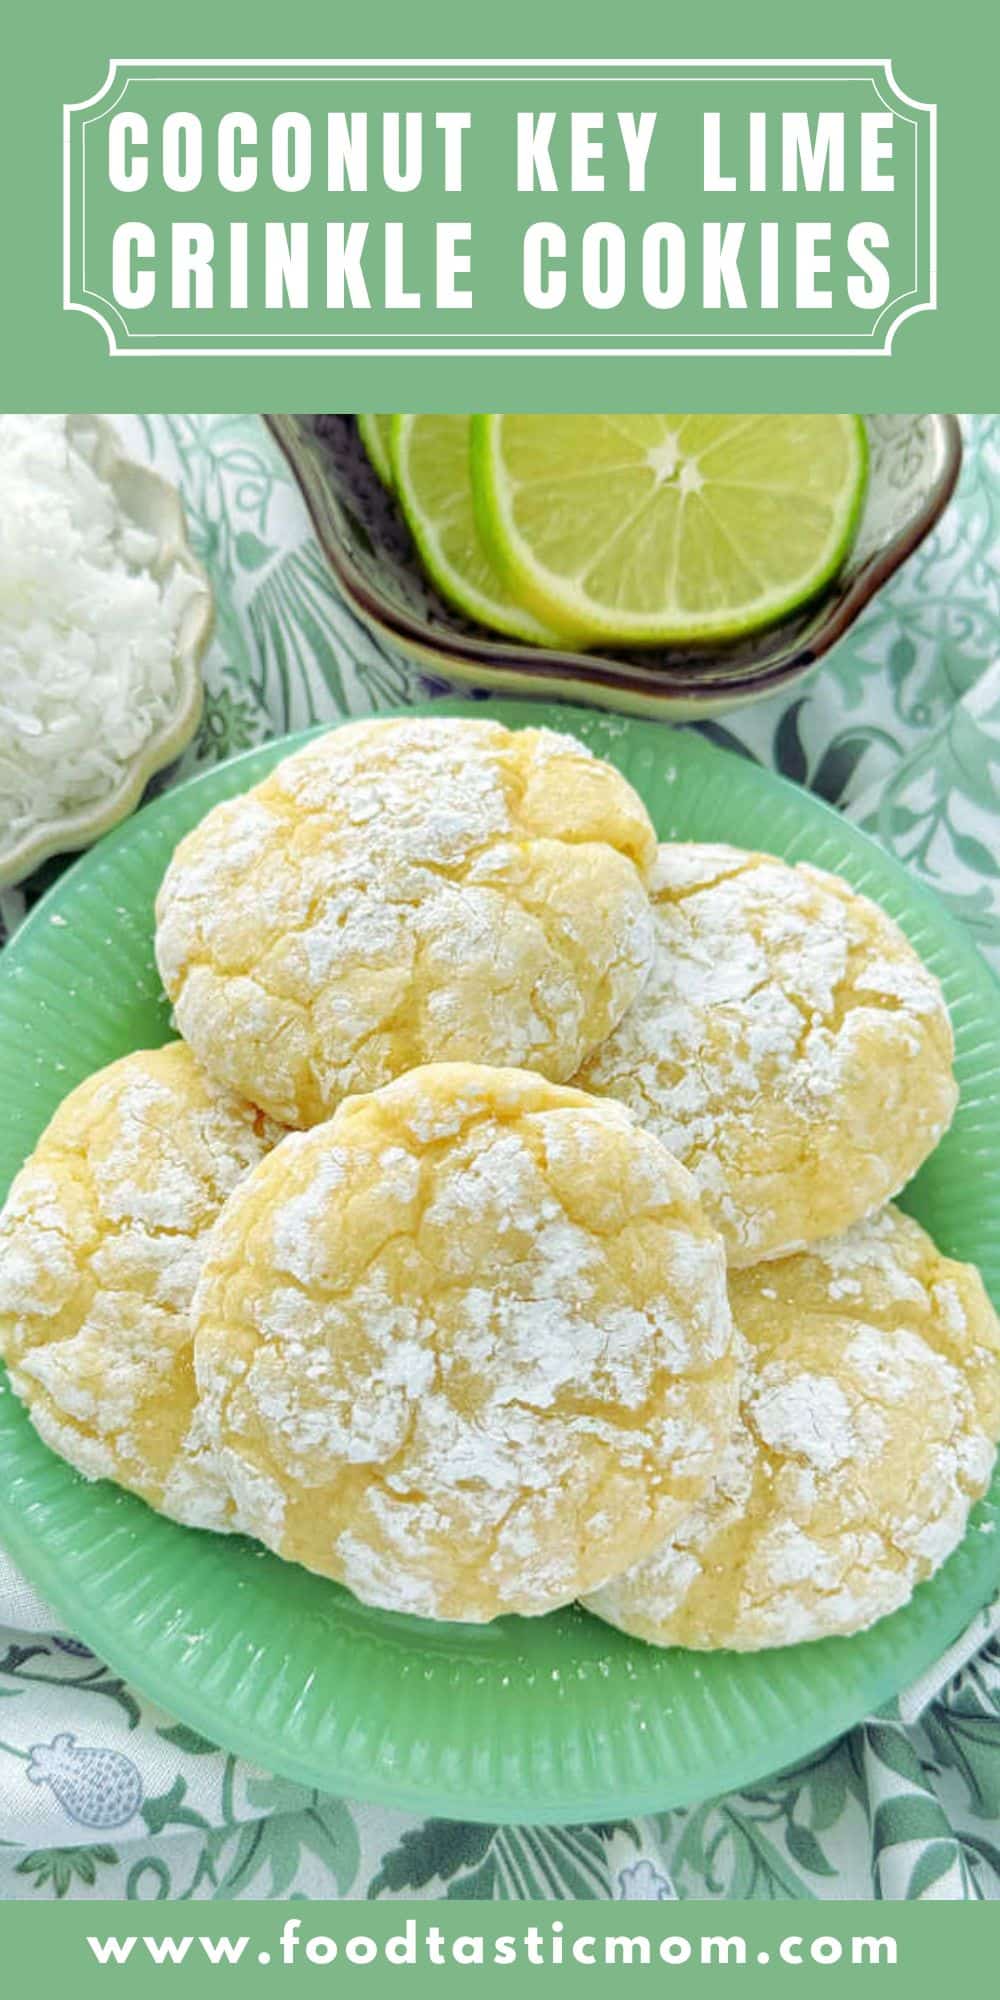 Coconut Key Lime Crinkle Cookies are bursting with key lime flavor with a hint of sweet coconut. Perfect for any time of year! via @foodtasticmom